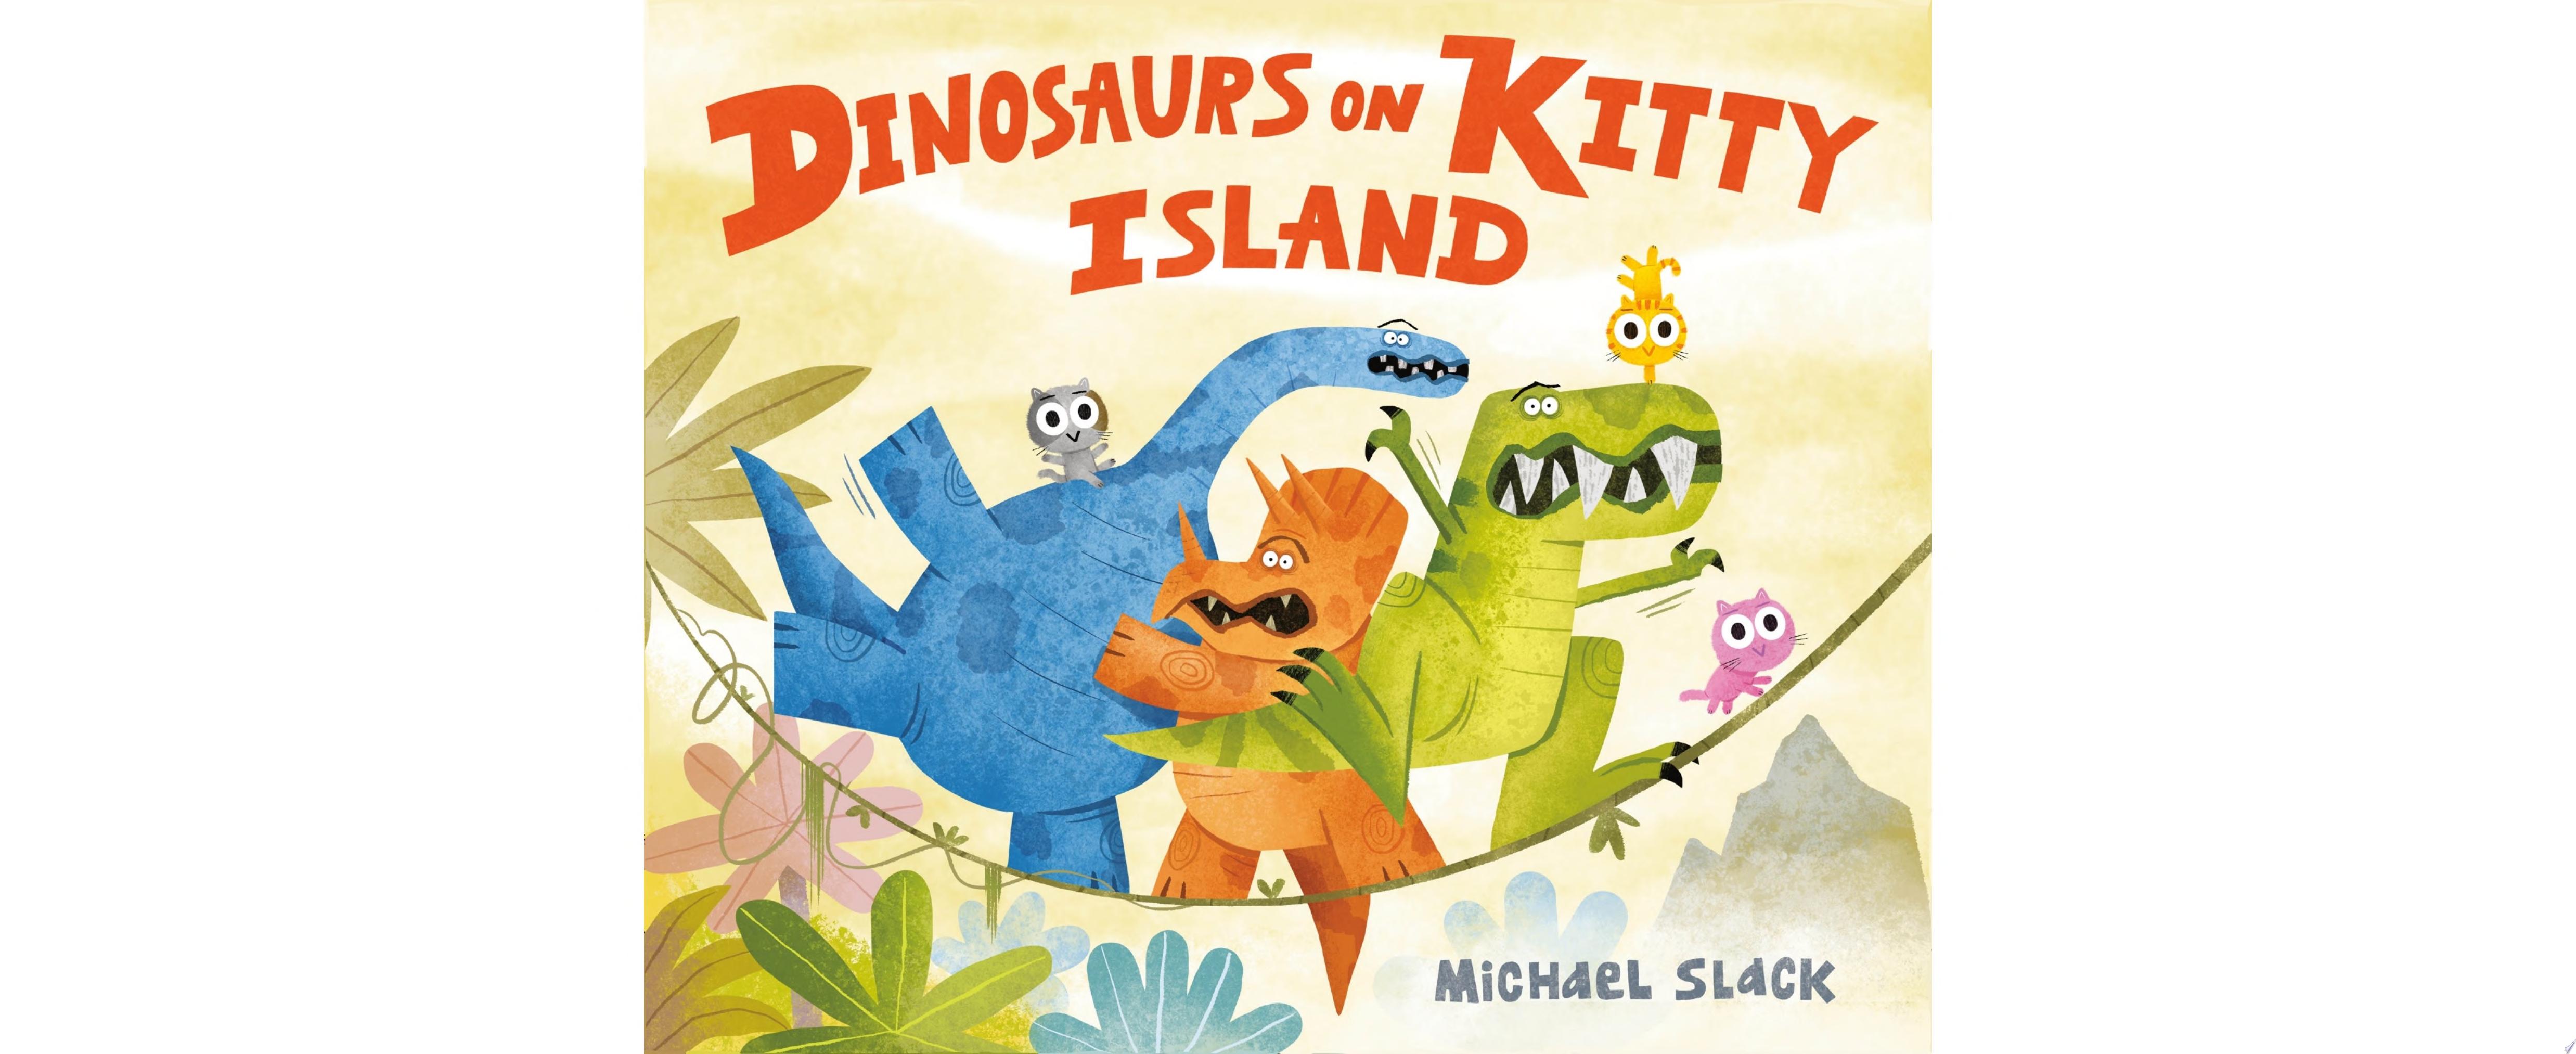 Image for "Dinosaurs on Kitty Island"